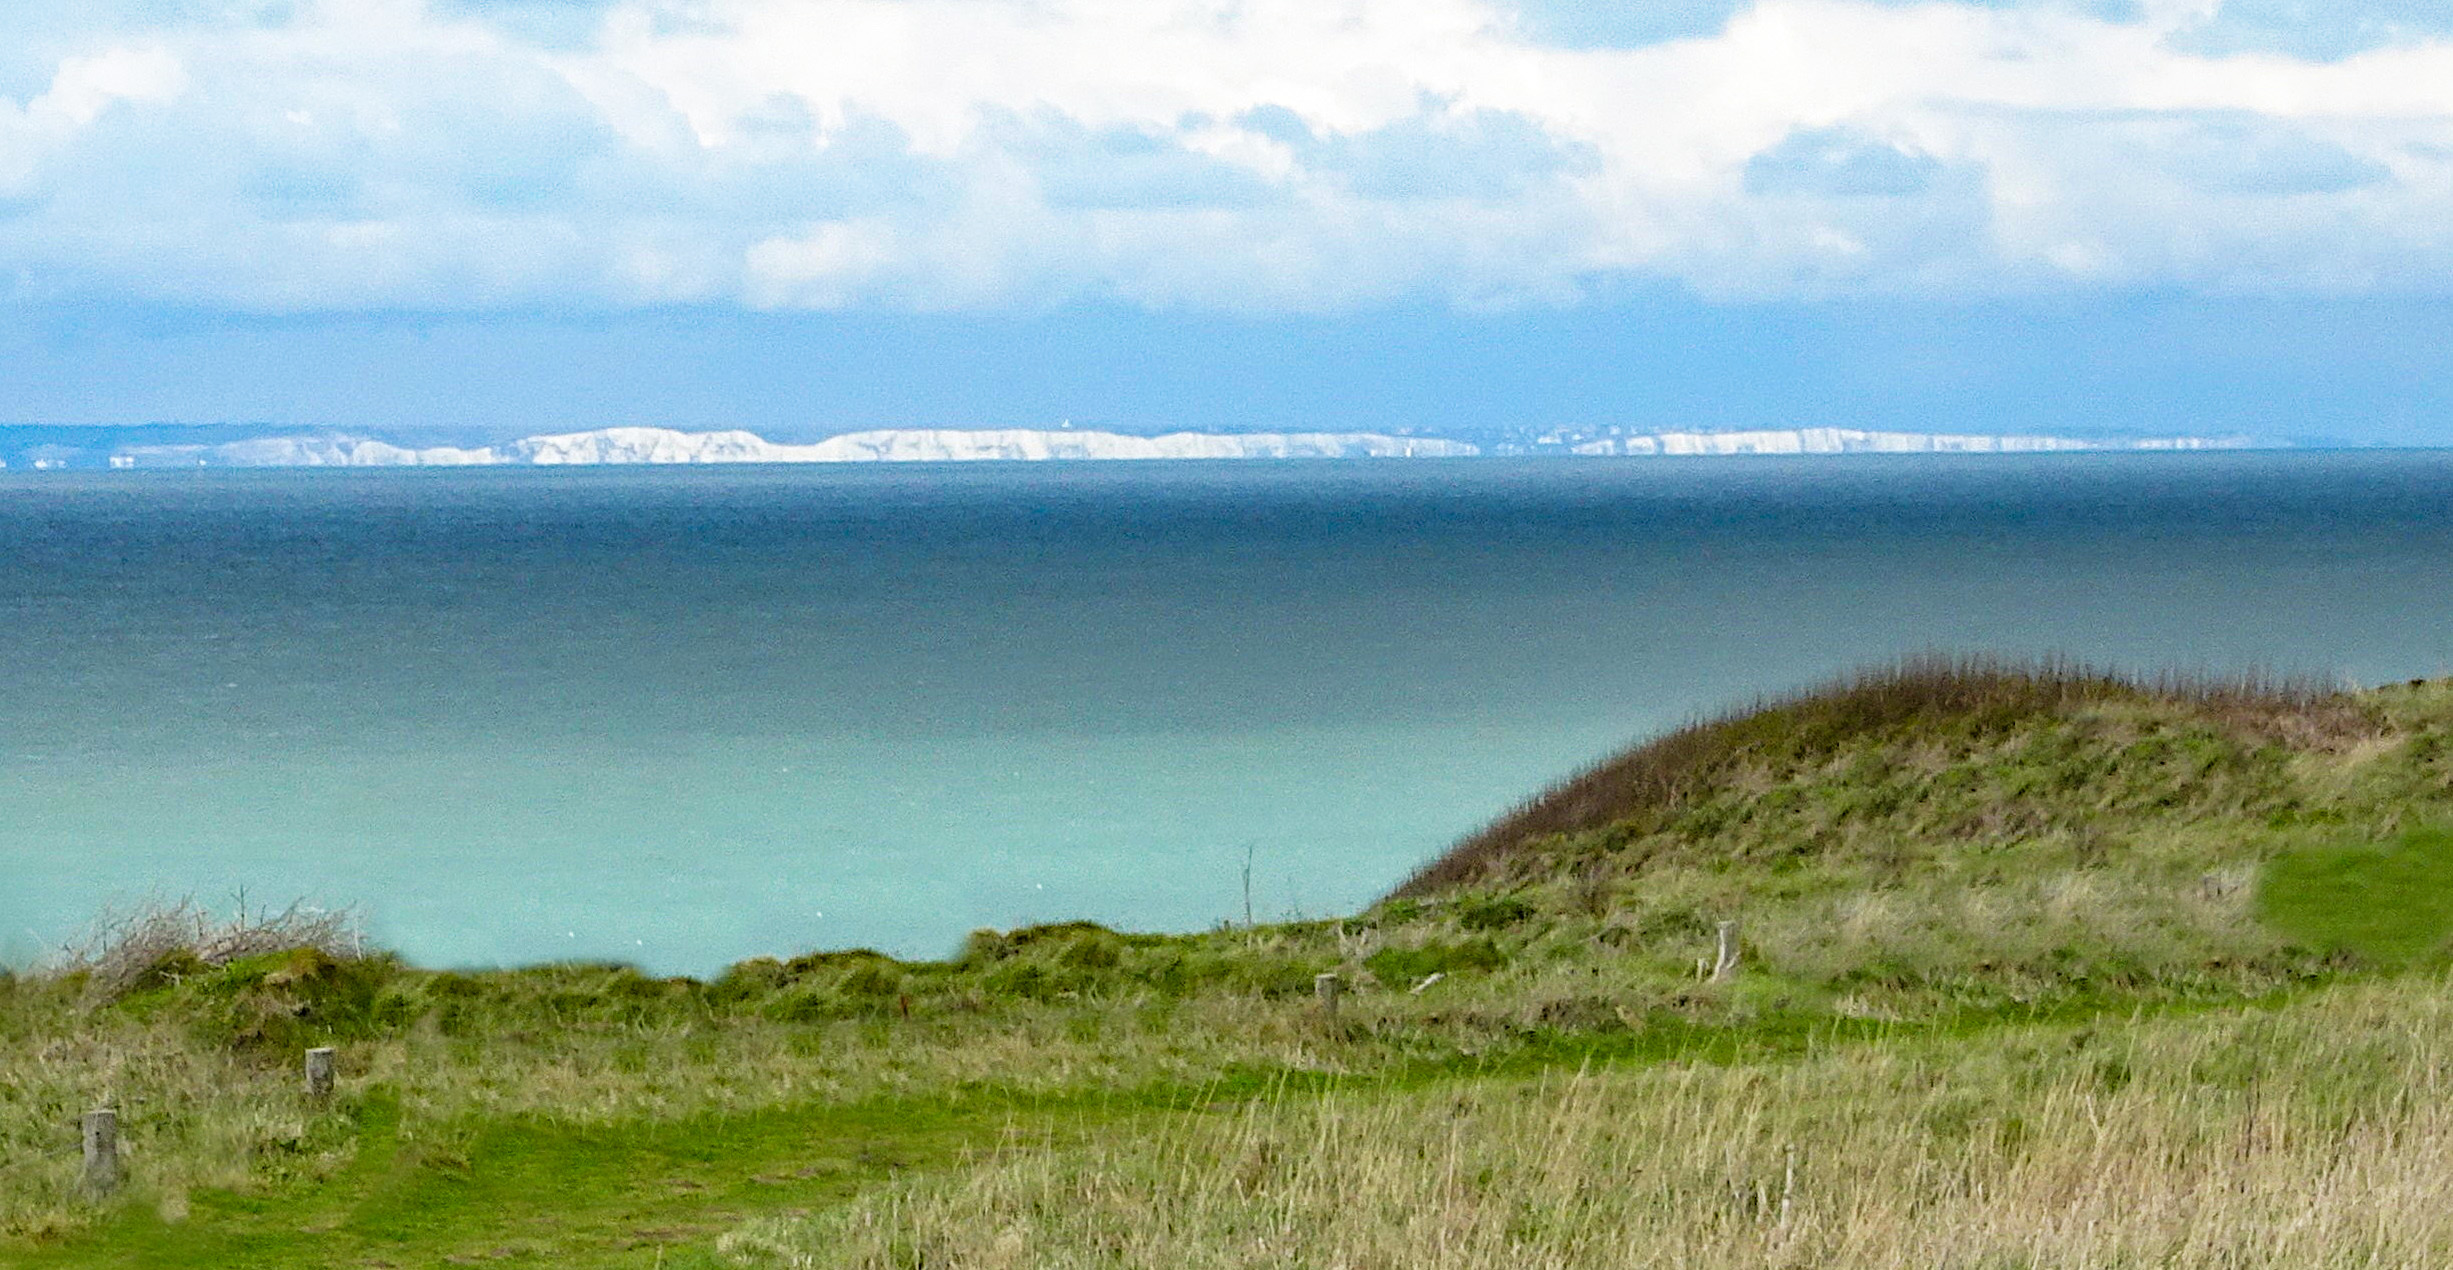 Cap Gris-Nez © Pierre André Leclercq - licence [CC BY-SA 4.0] from Wikimedia Commons